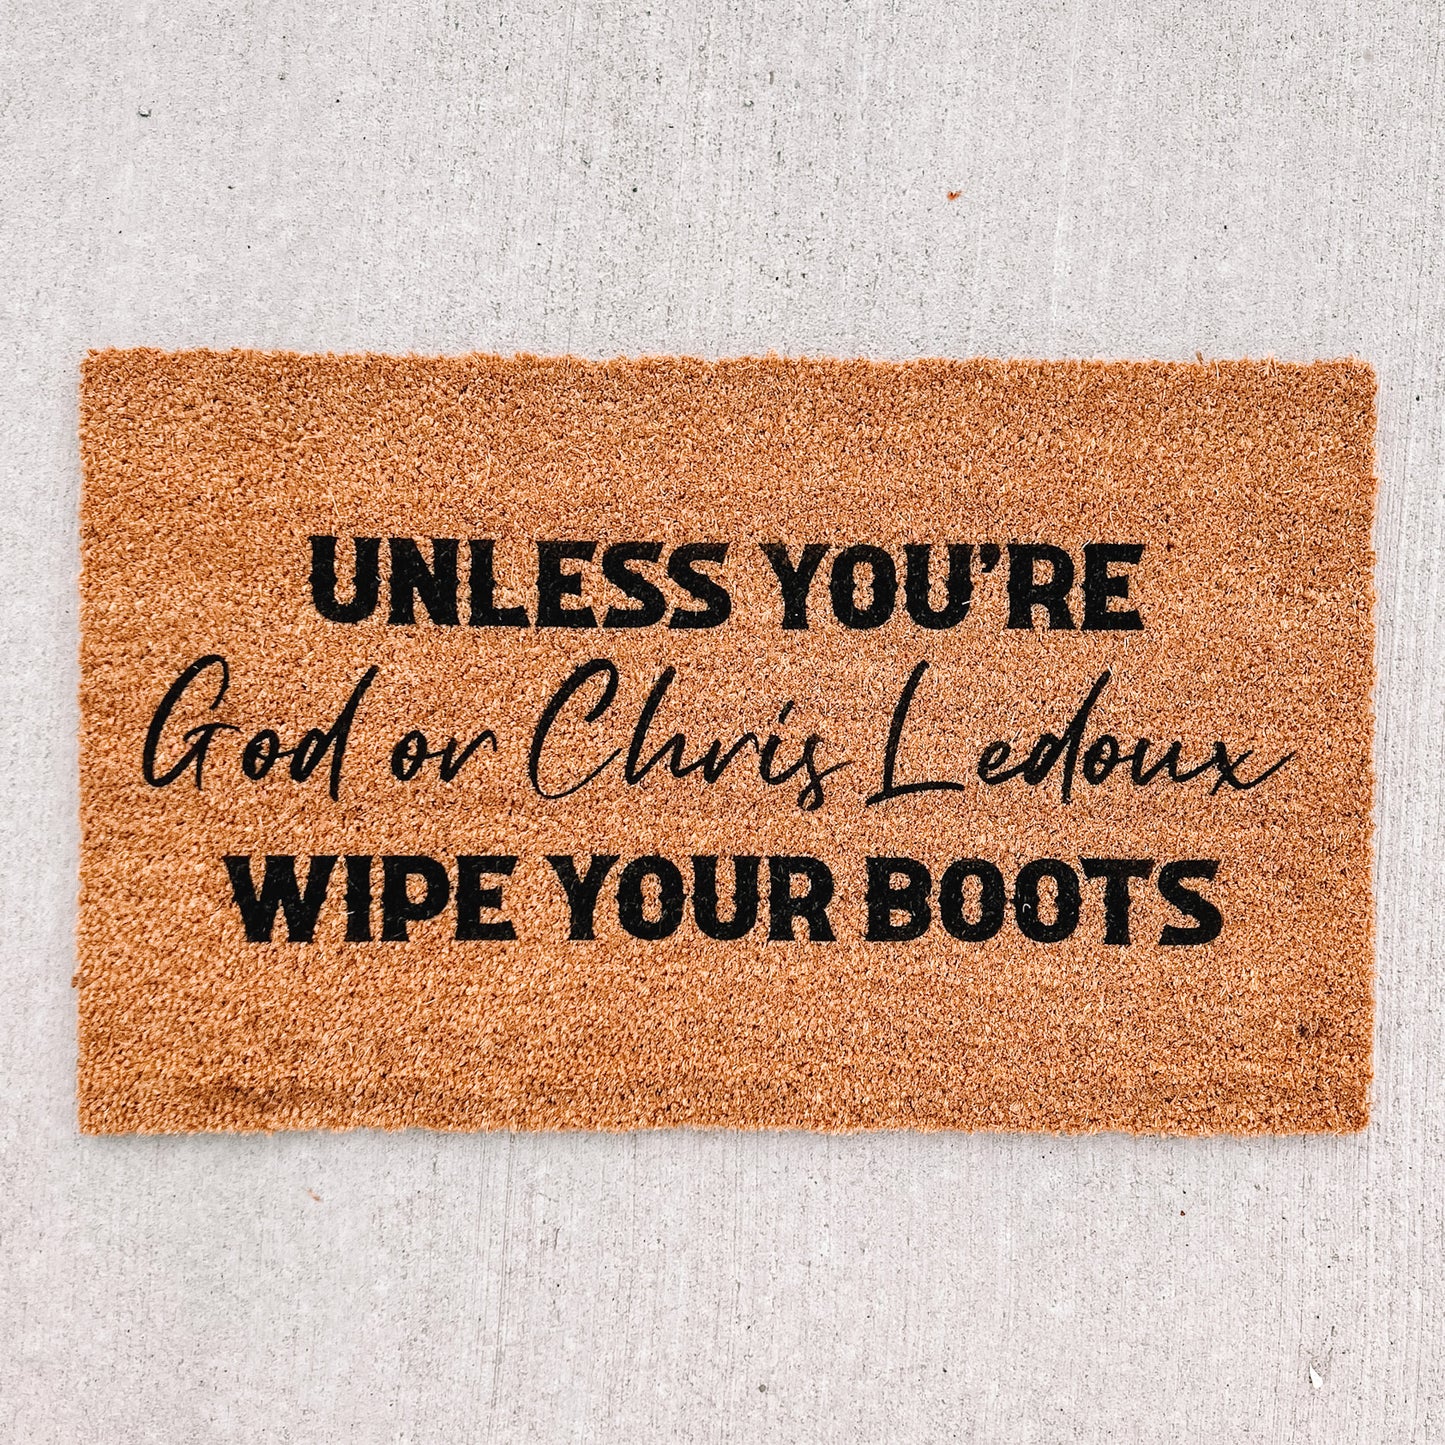 unless you're god or chris ledoux, wipe your boots doormat